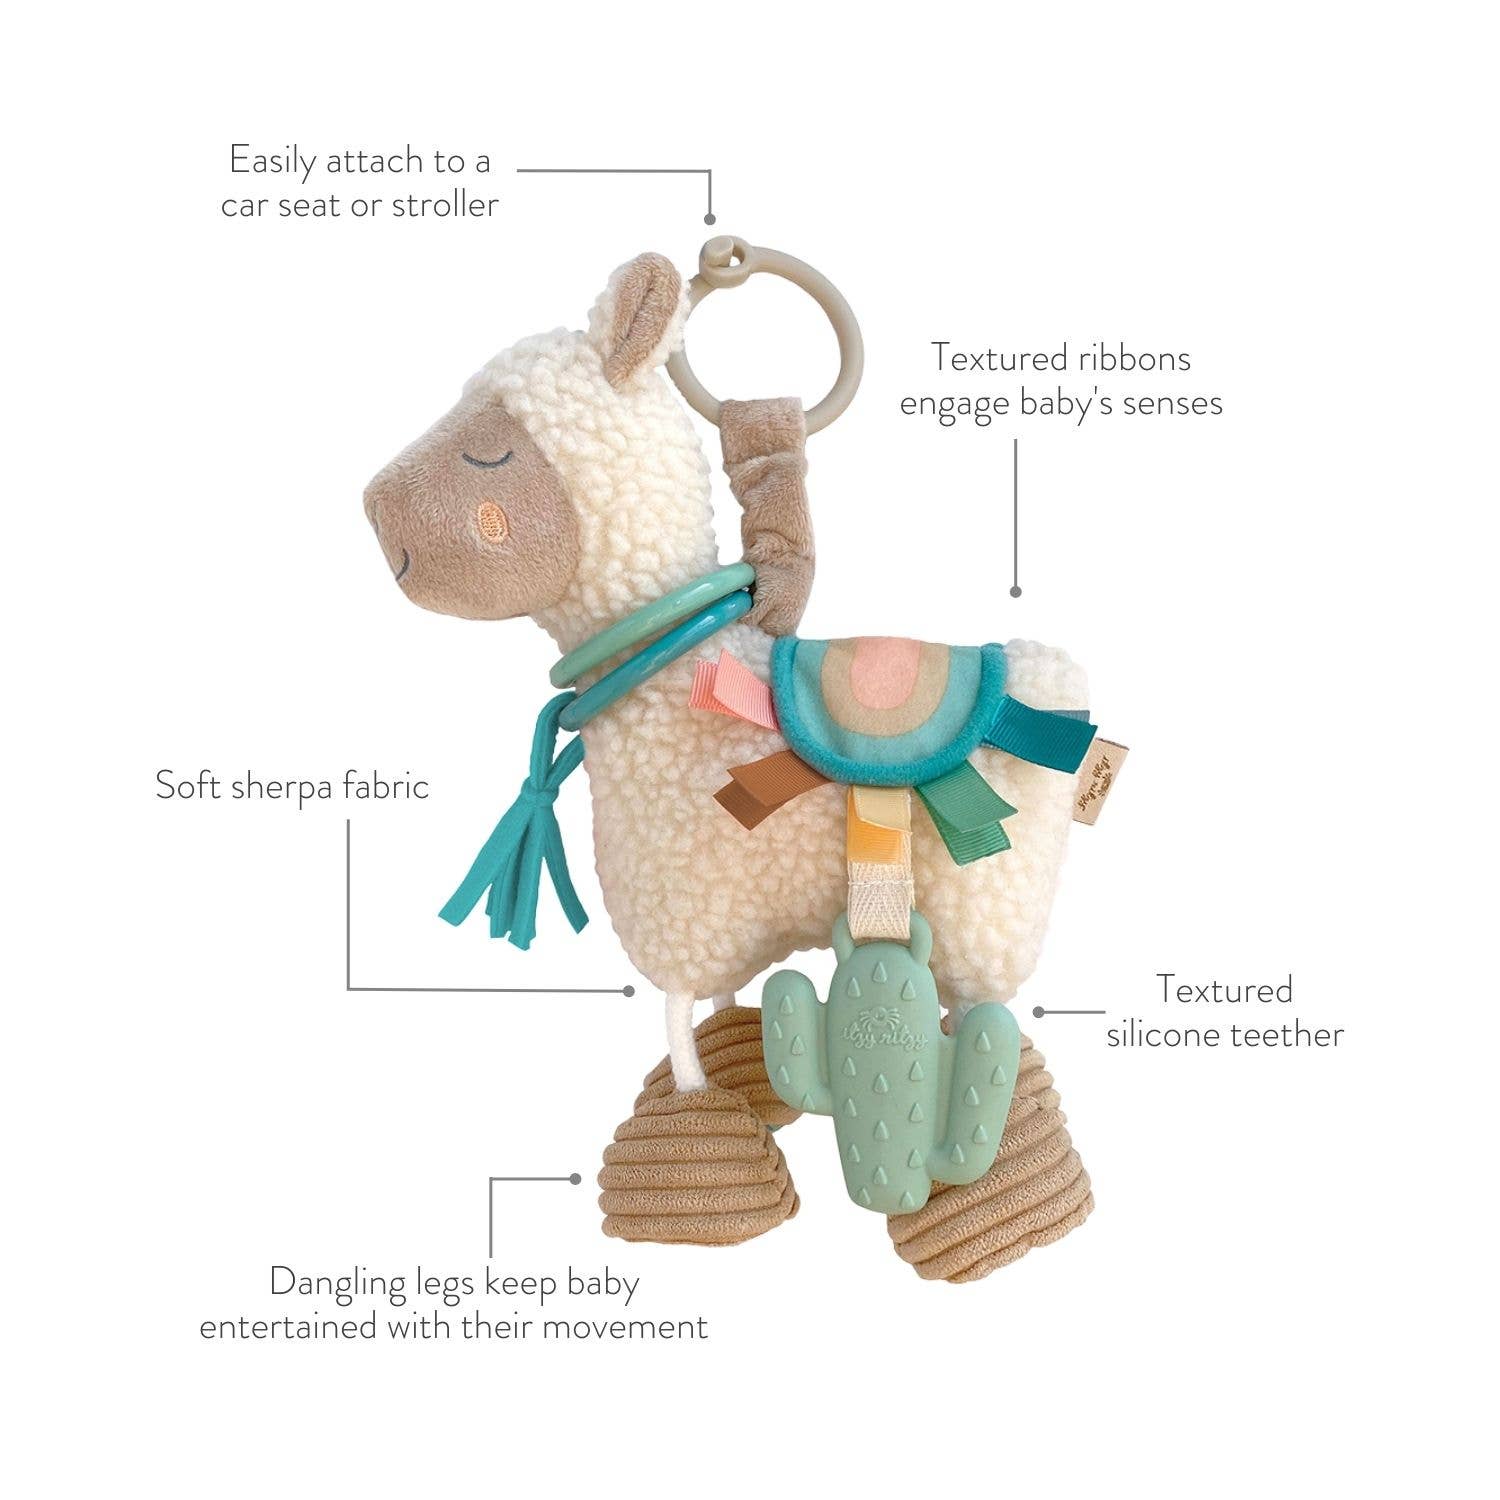 LLAMA Itzy Friends Link & Love™ Activity Plush with Teether Toy